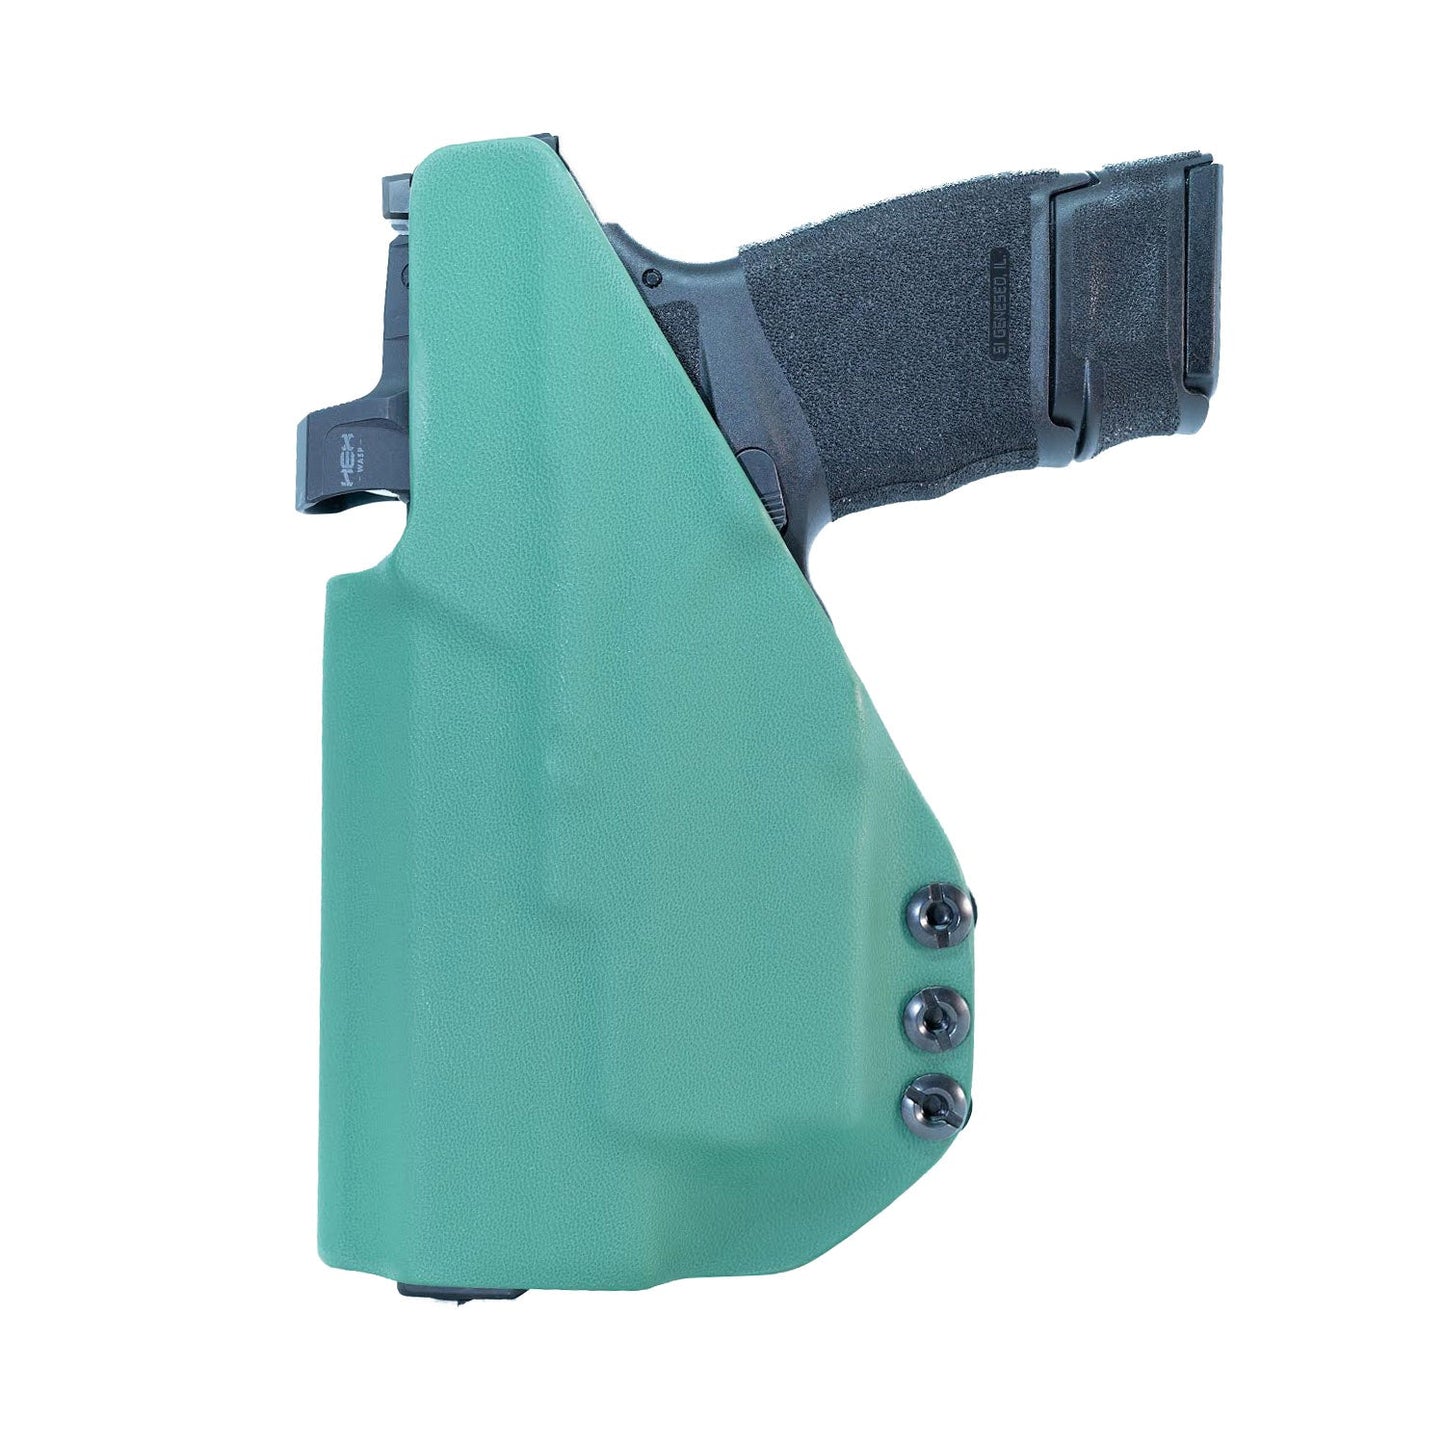 P365XL With TLR6 Light  IWB ( Inside The Waistband Holster)